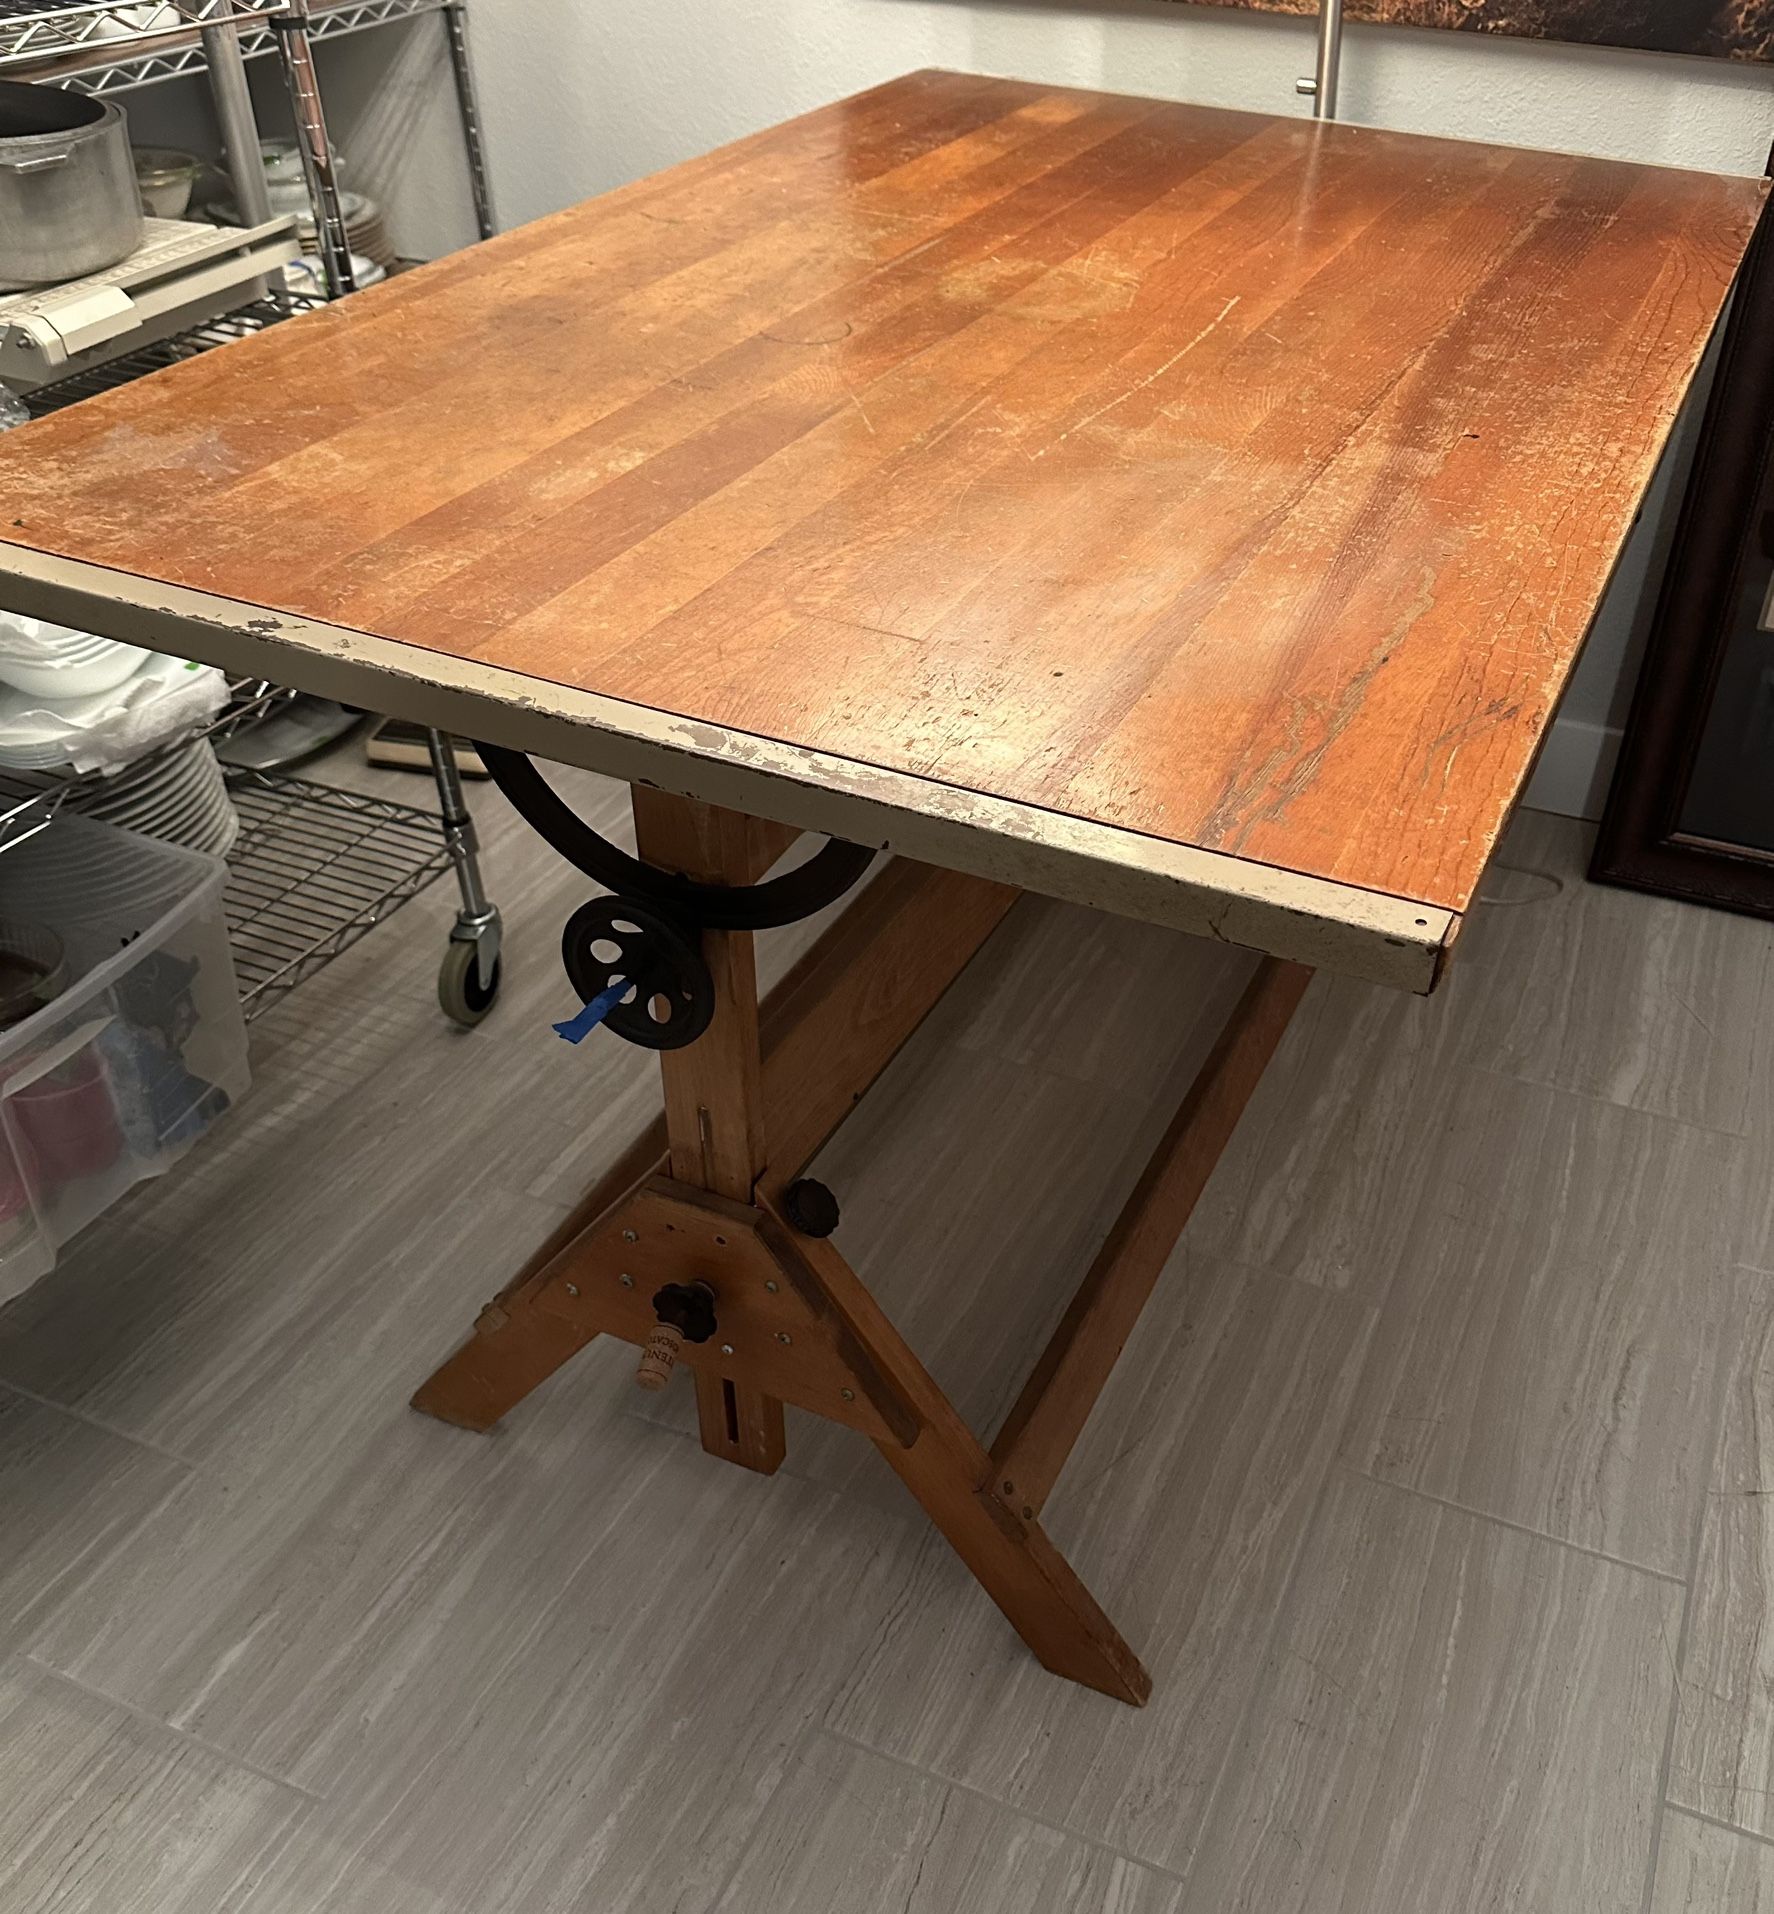 Drafting Work Table Antique, All Original. Works as it should.  Large Format 60”x 38” see below